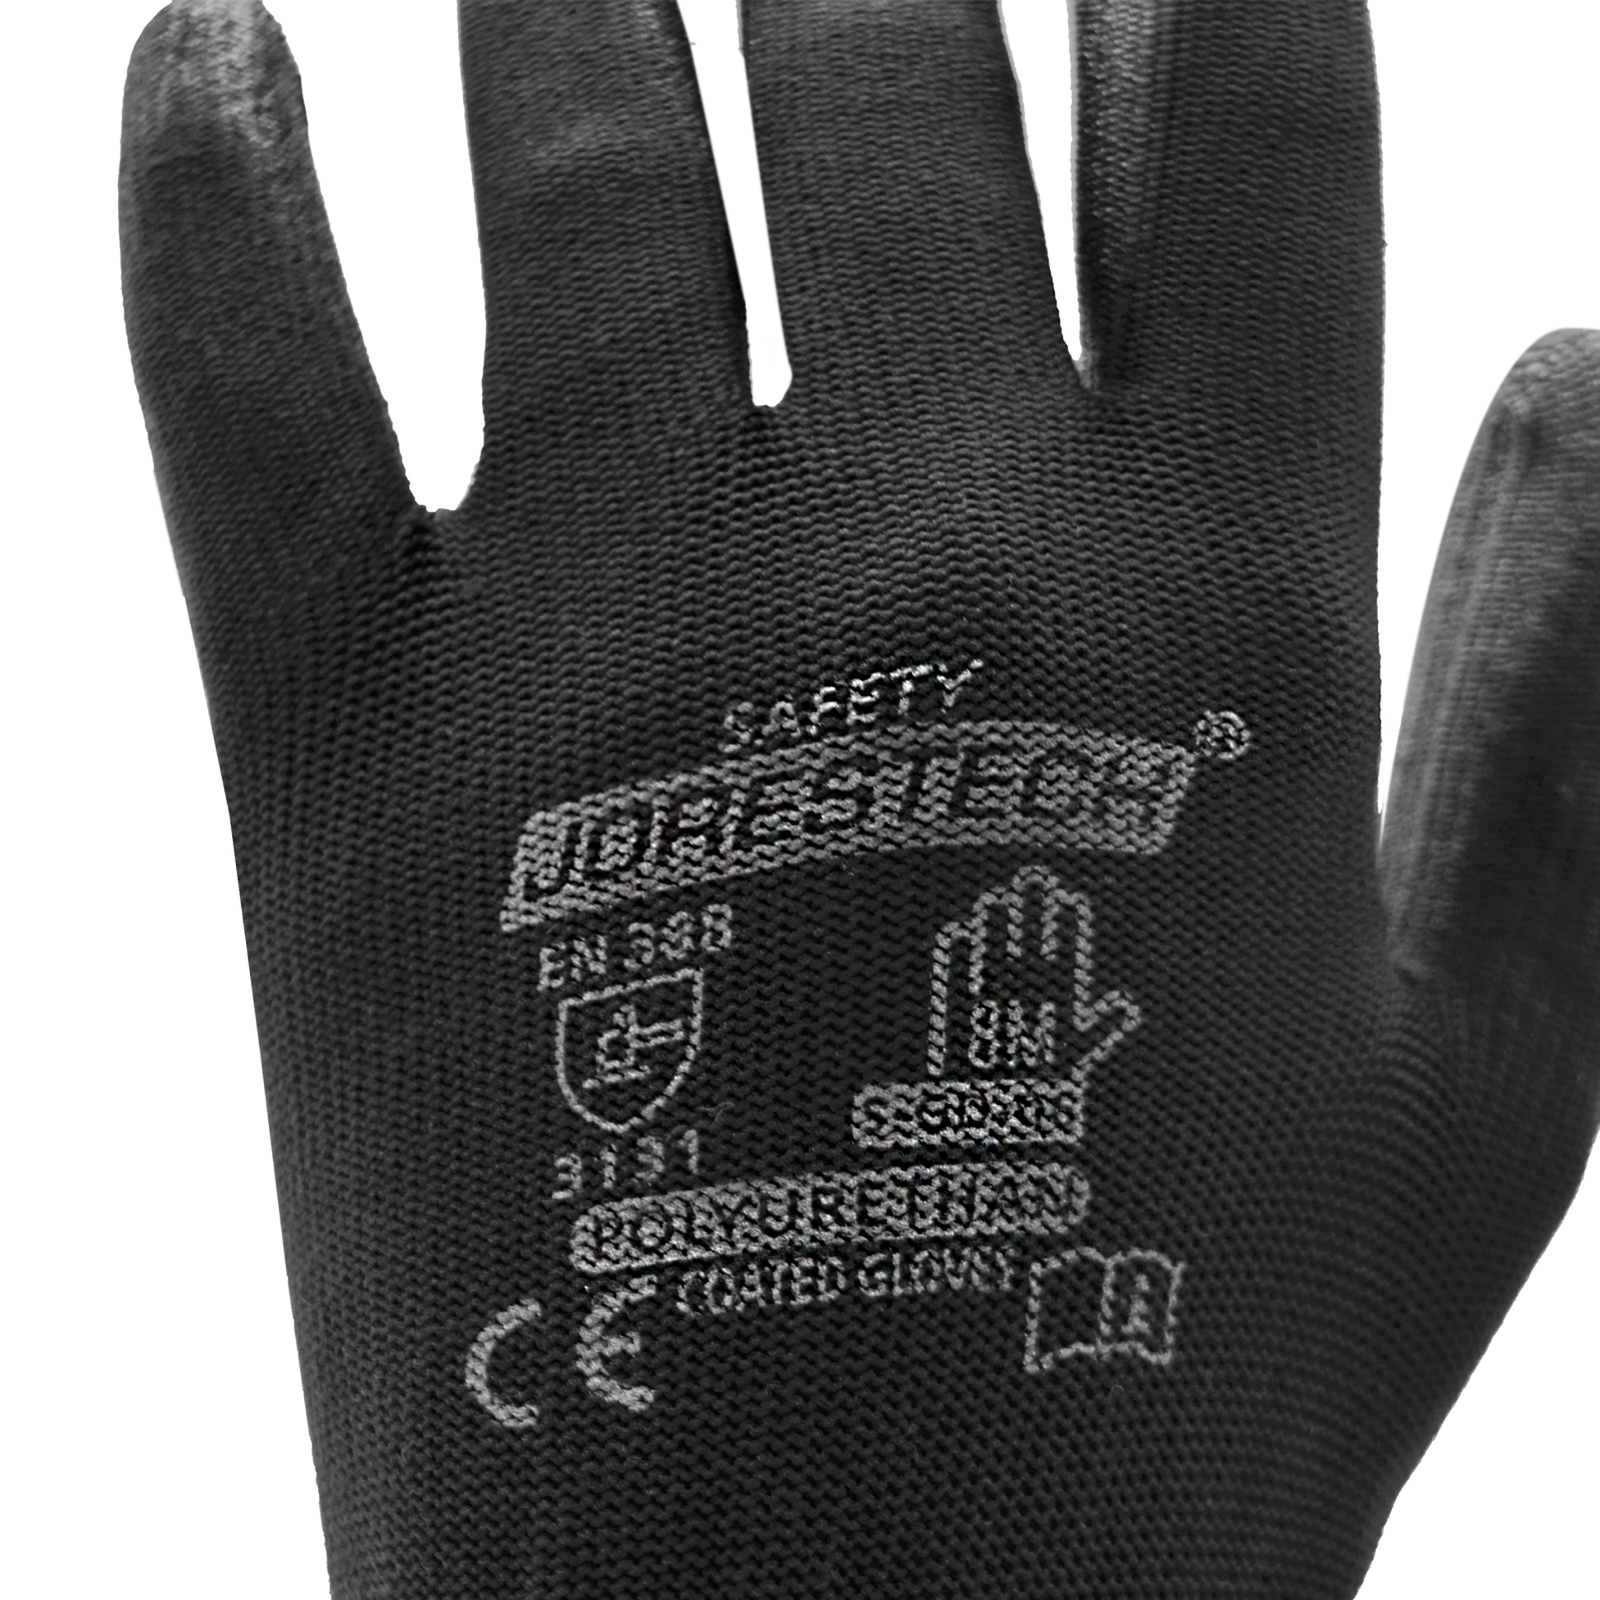 Print on the black dipped safety work glove